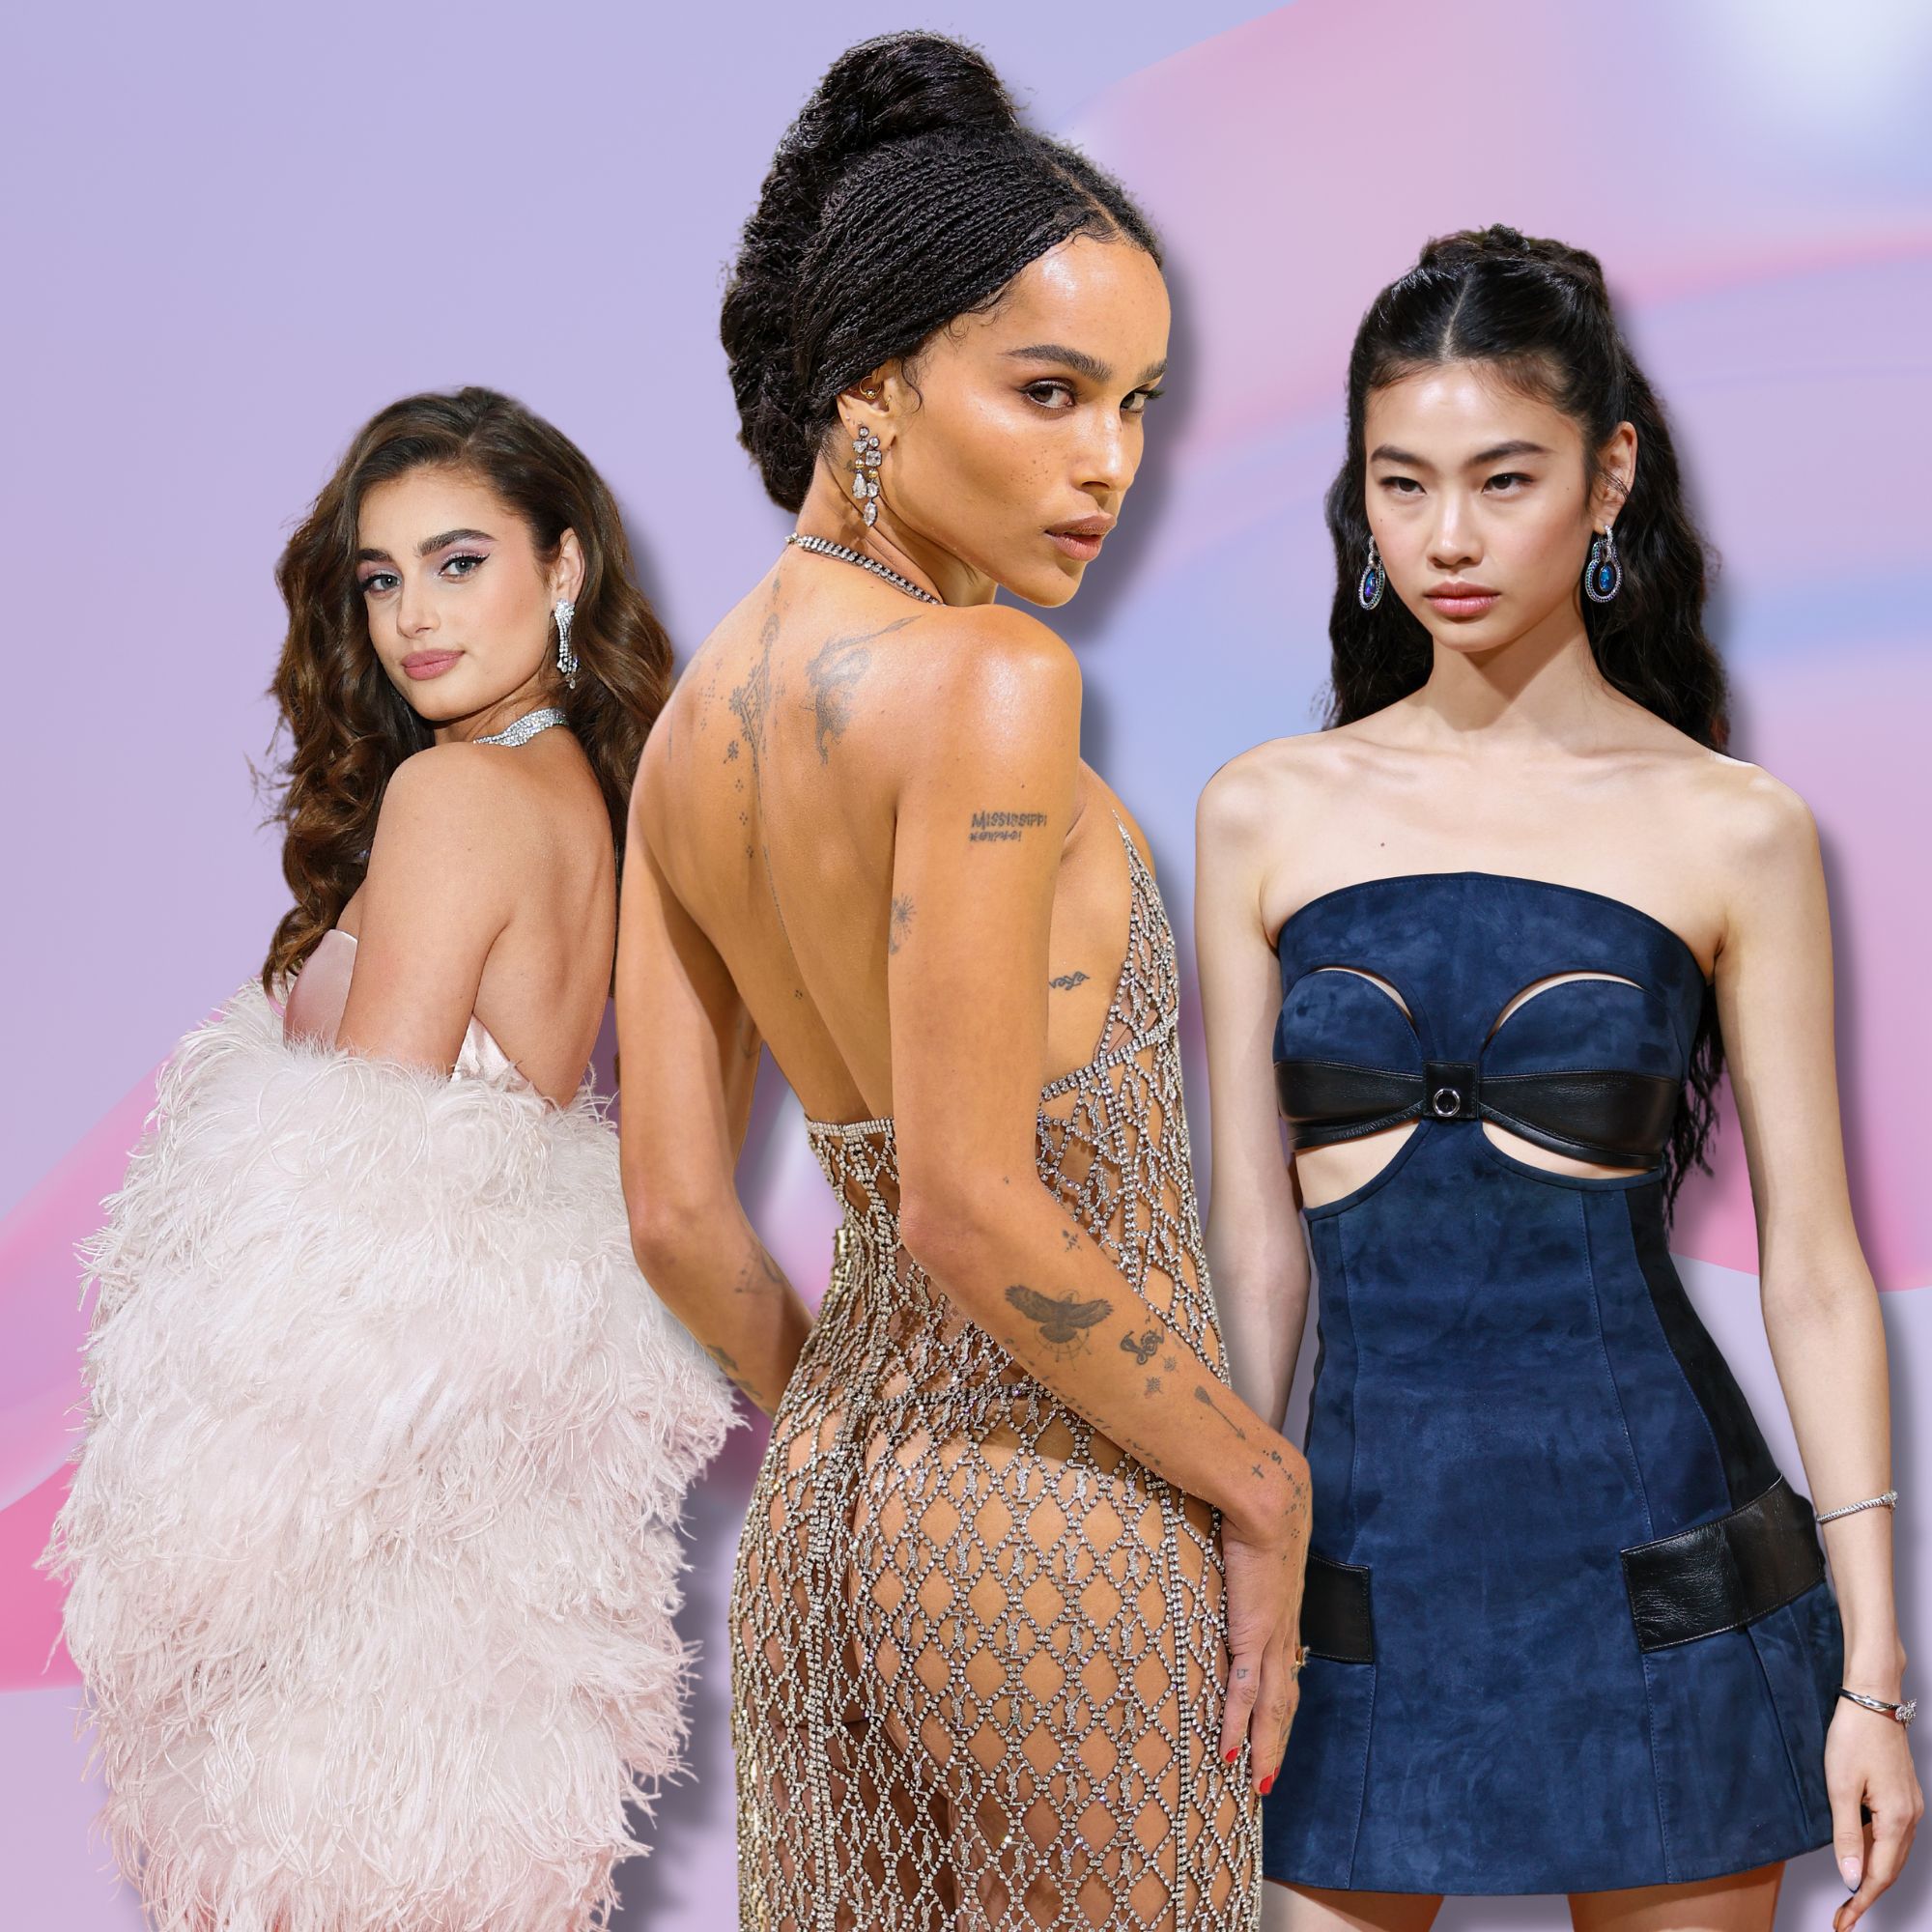 Hoyeon Jung Wore A Suede Cut-Out Mini Dress to the 2022 Met Gala